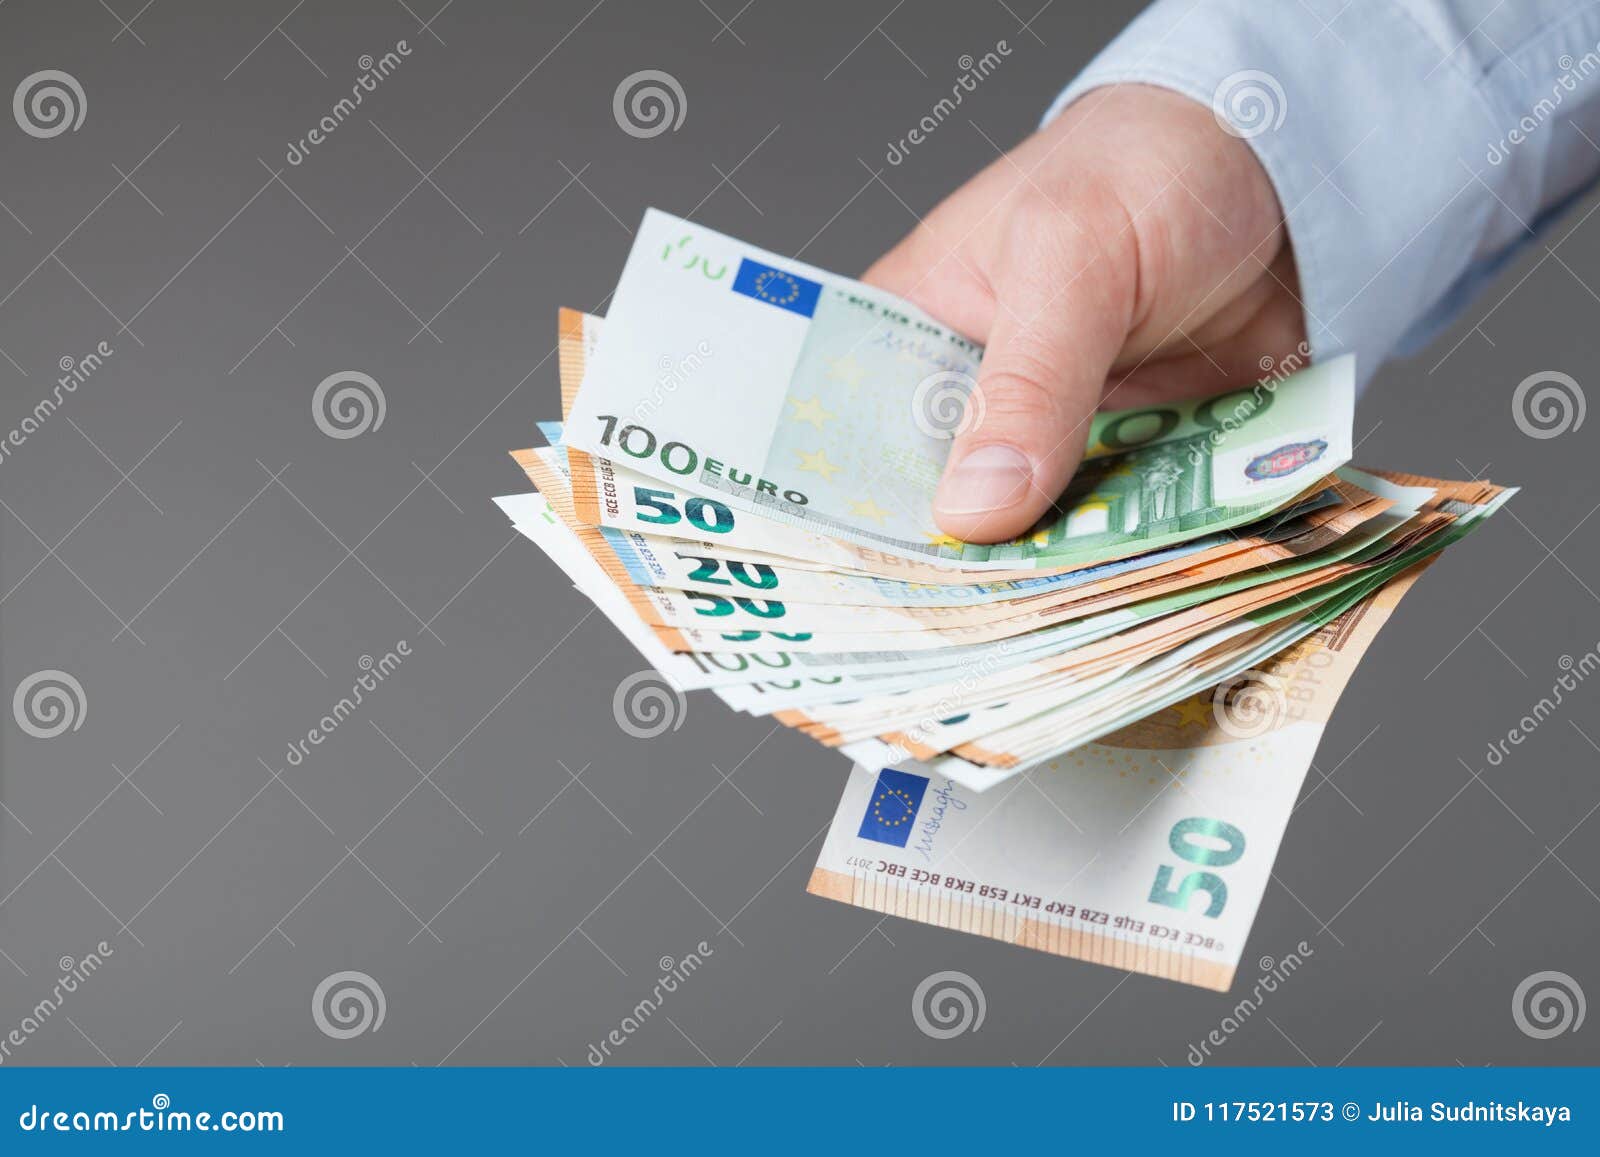 man in shirt holding euro money in his hands. banking, salary and donate concept.